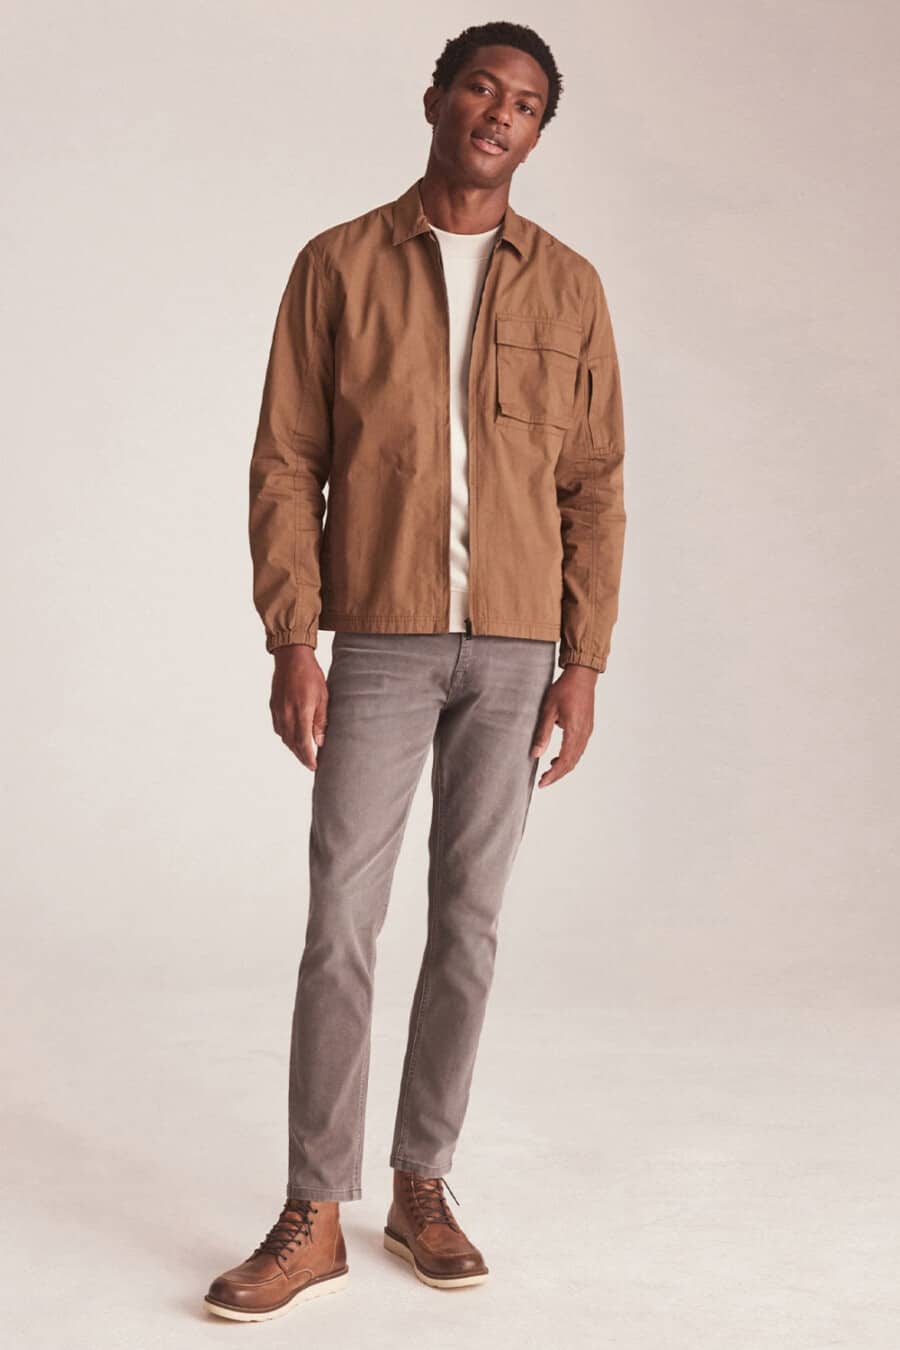 Men's grey jeans, white T-shirt, tan worker jacket and tan leather worker boots outfit